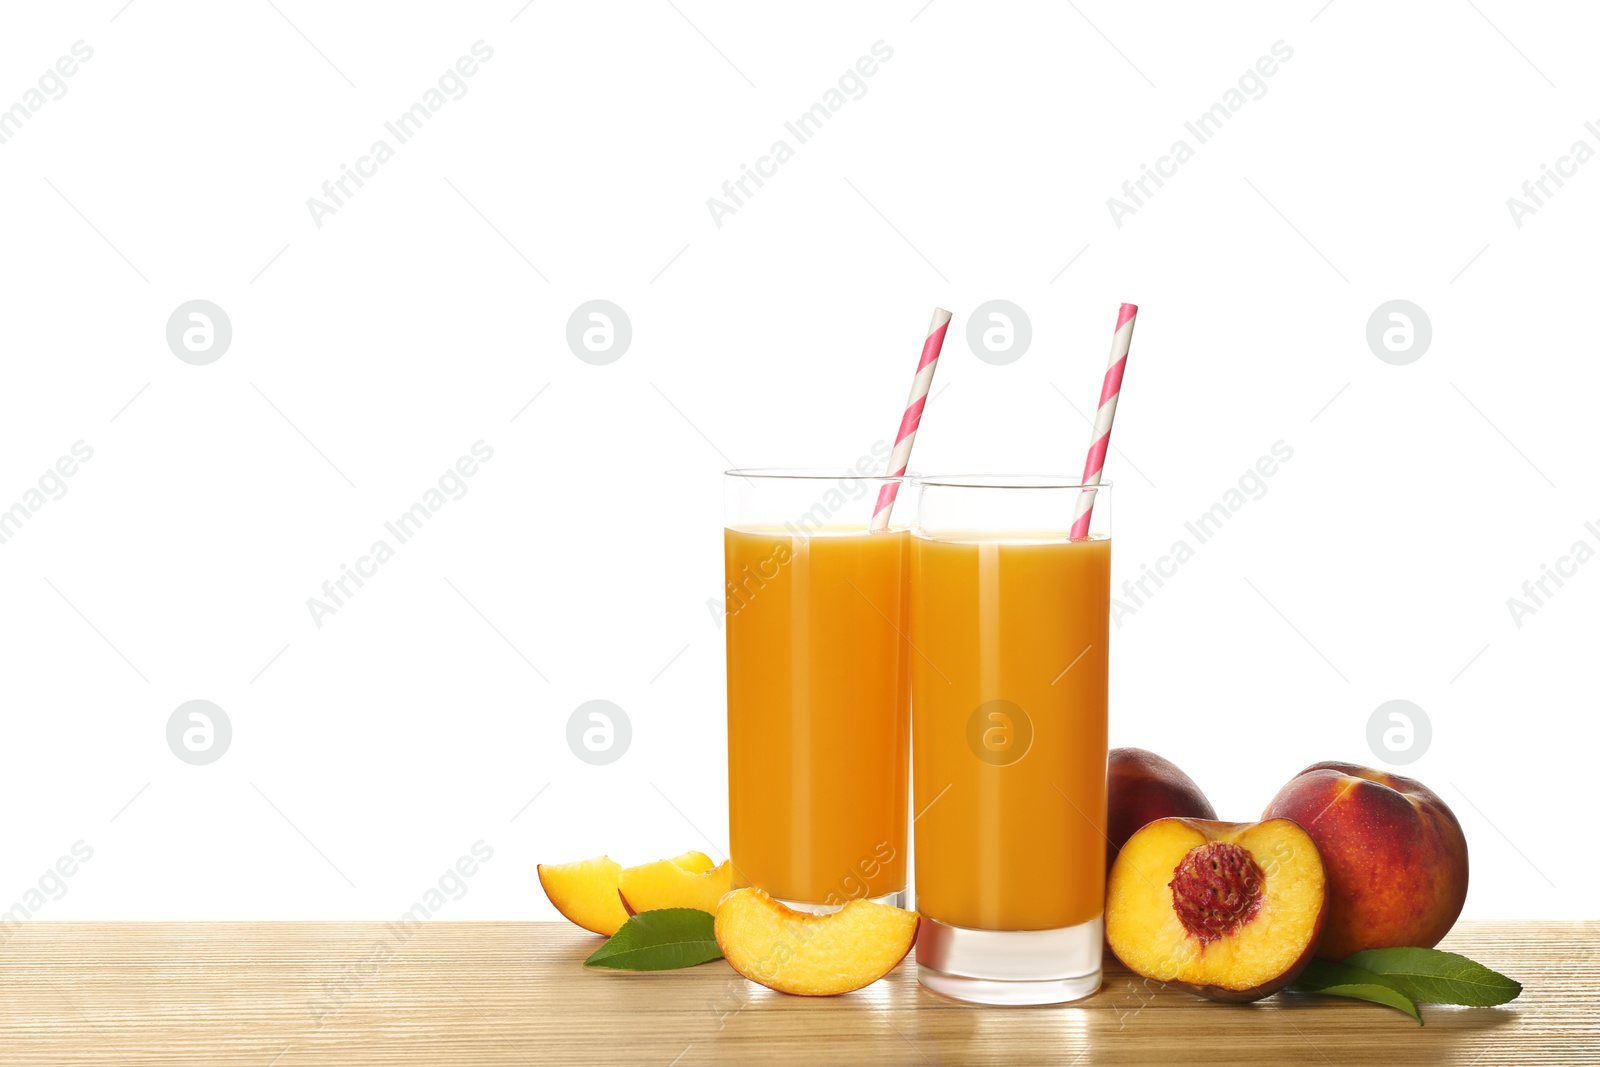 Photo of Freshly made tasty peach juice on wooden table against white background